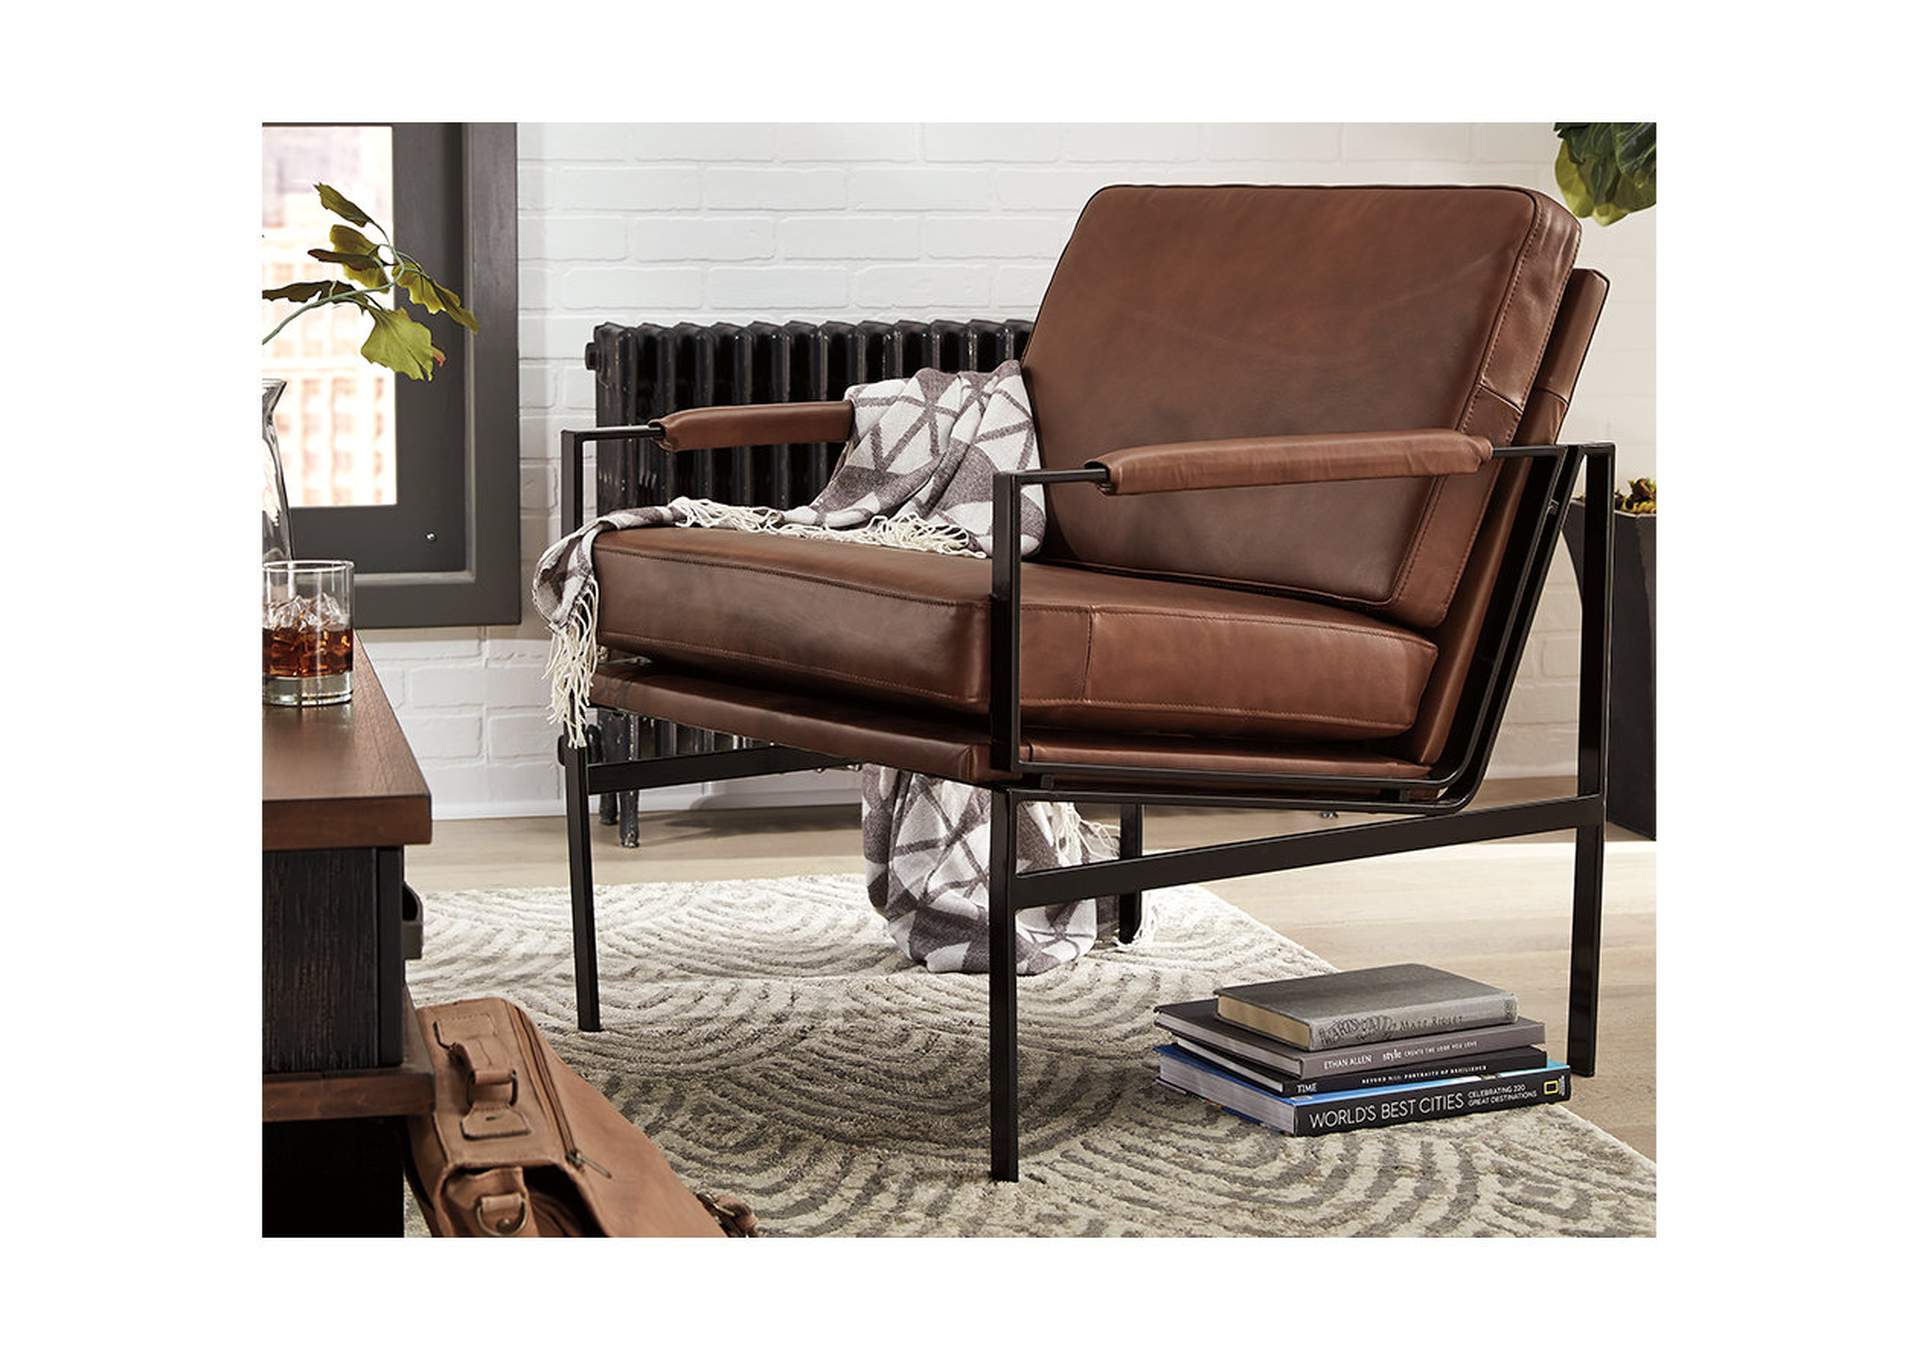 Puckman Brown/Silver Finish Accent Chair,Direct To Consumer Express